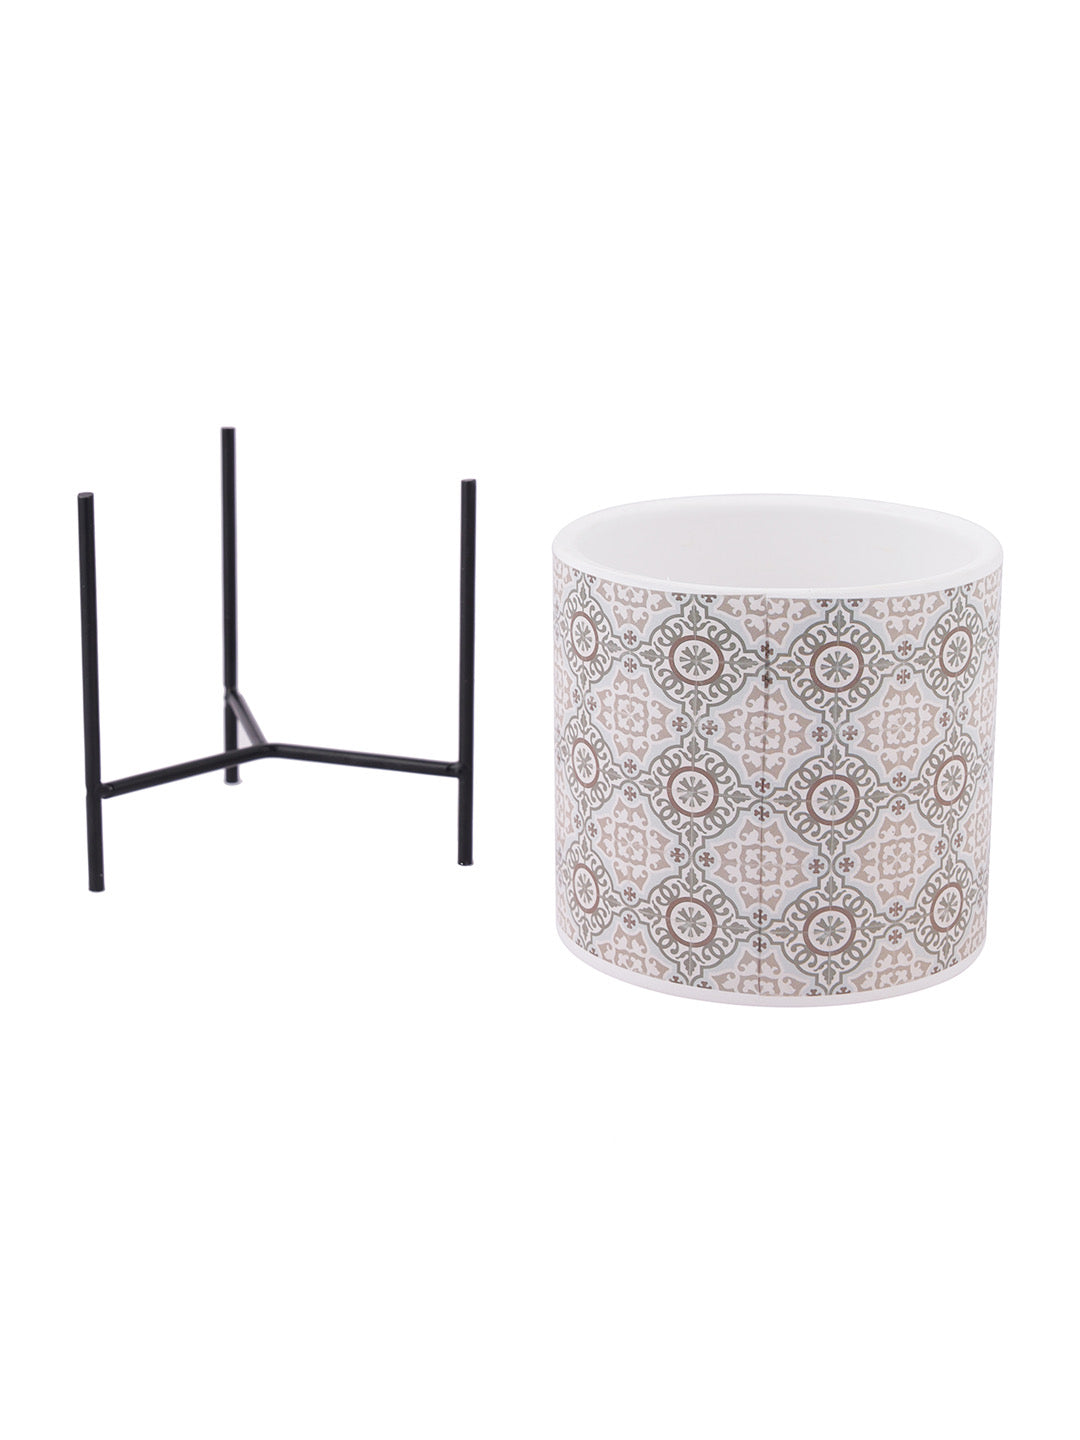 Honeycomb print Planter with Black Stand - Default Title (CH210043)